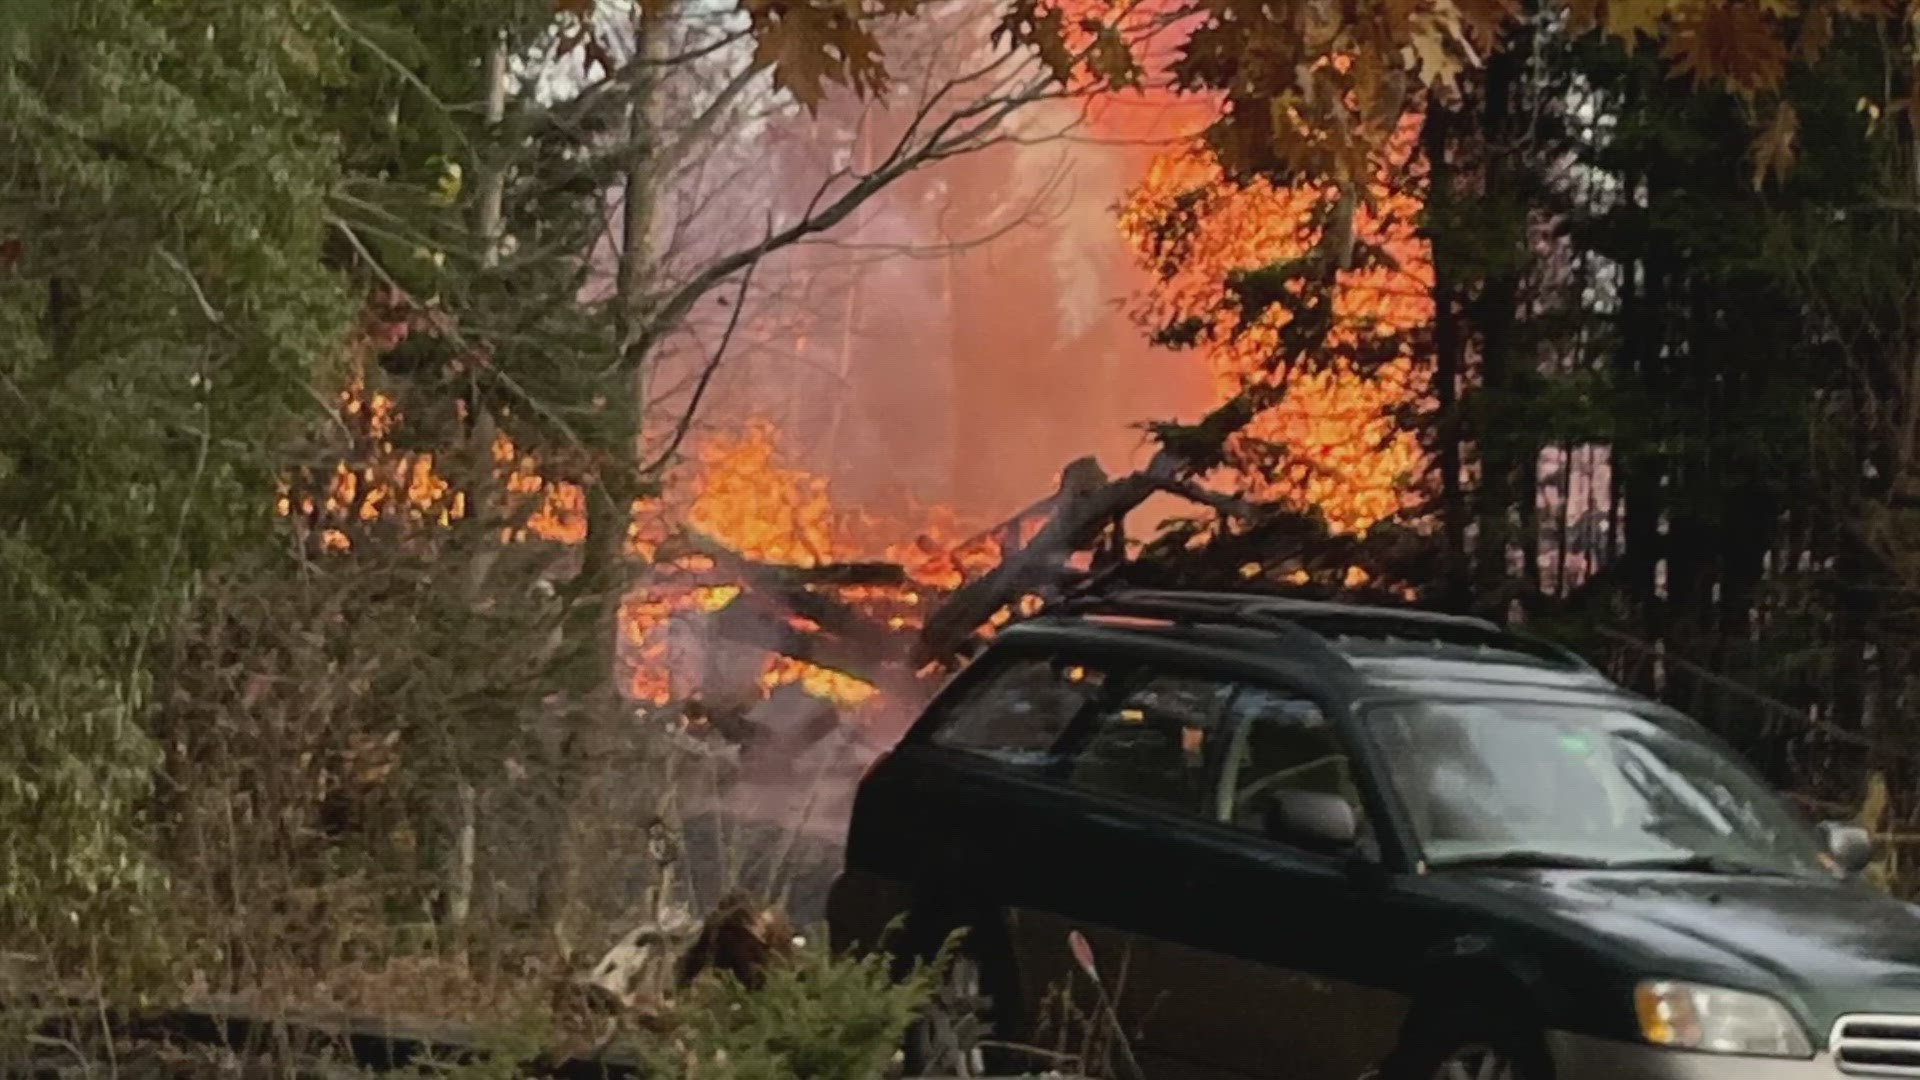 A two-story home was destroyed in the fire. As of Monday night, one person is unaccounted for, according to Maine Department of Safety spokesperson Shannon Moss.